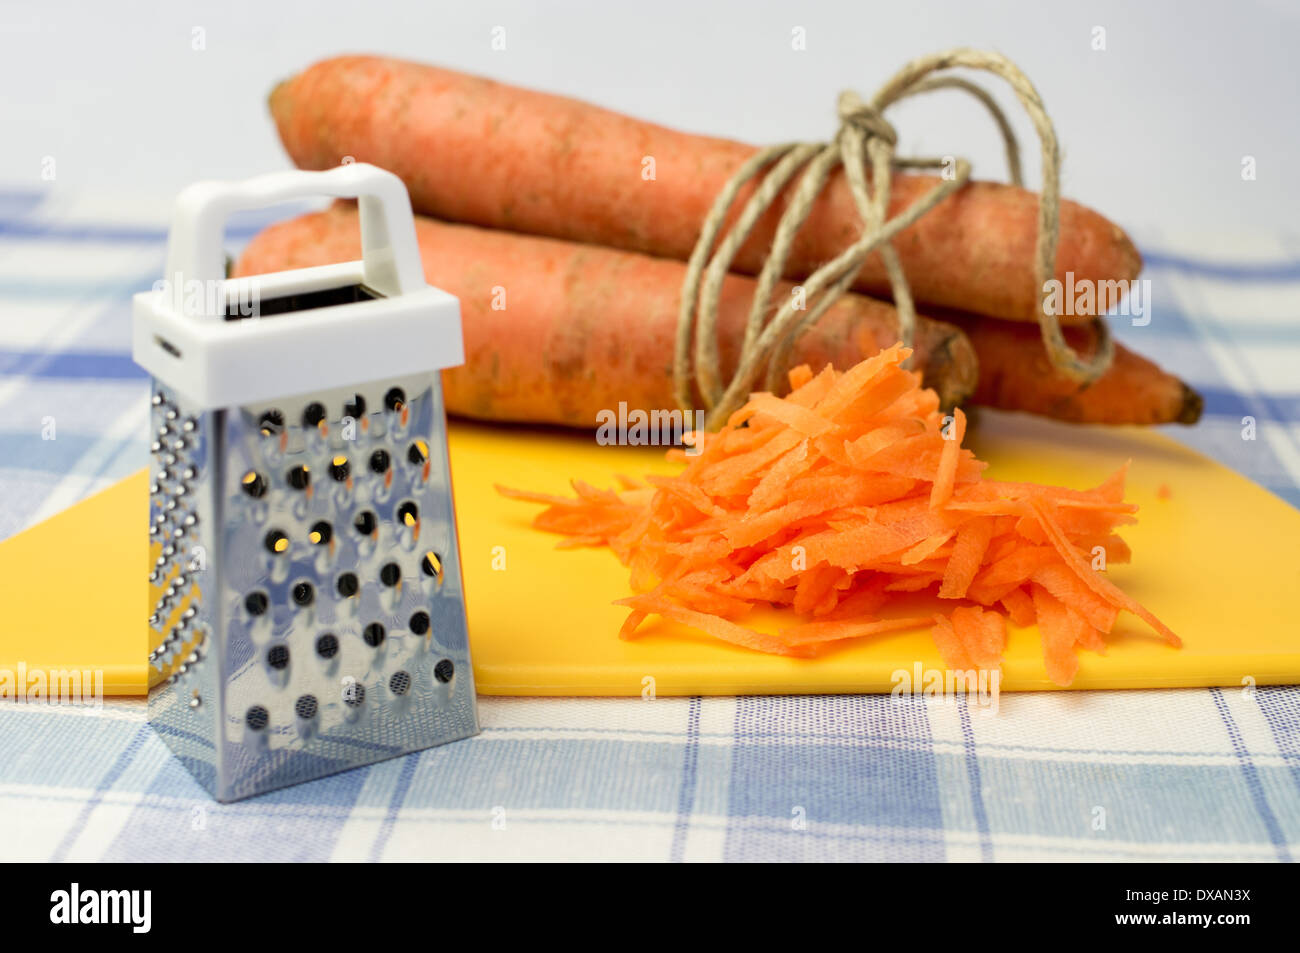 https://c8.alamy.com/comp/DXAN3X/grated-carrot-grater-for-vegetables-carrot-farm-in-conjunction-DXAN3X.jpg